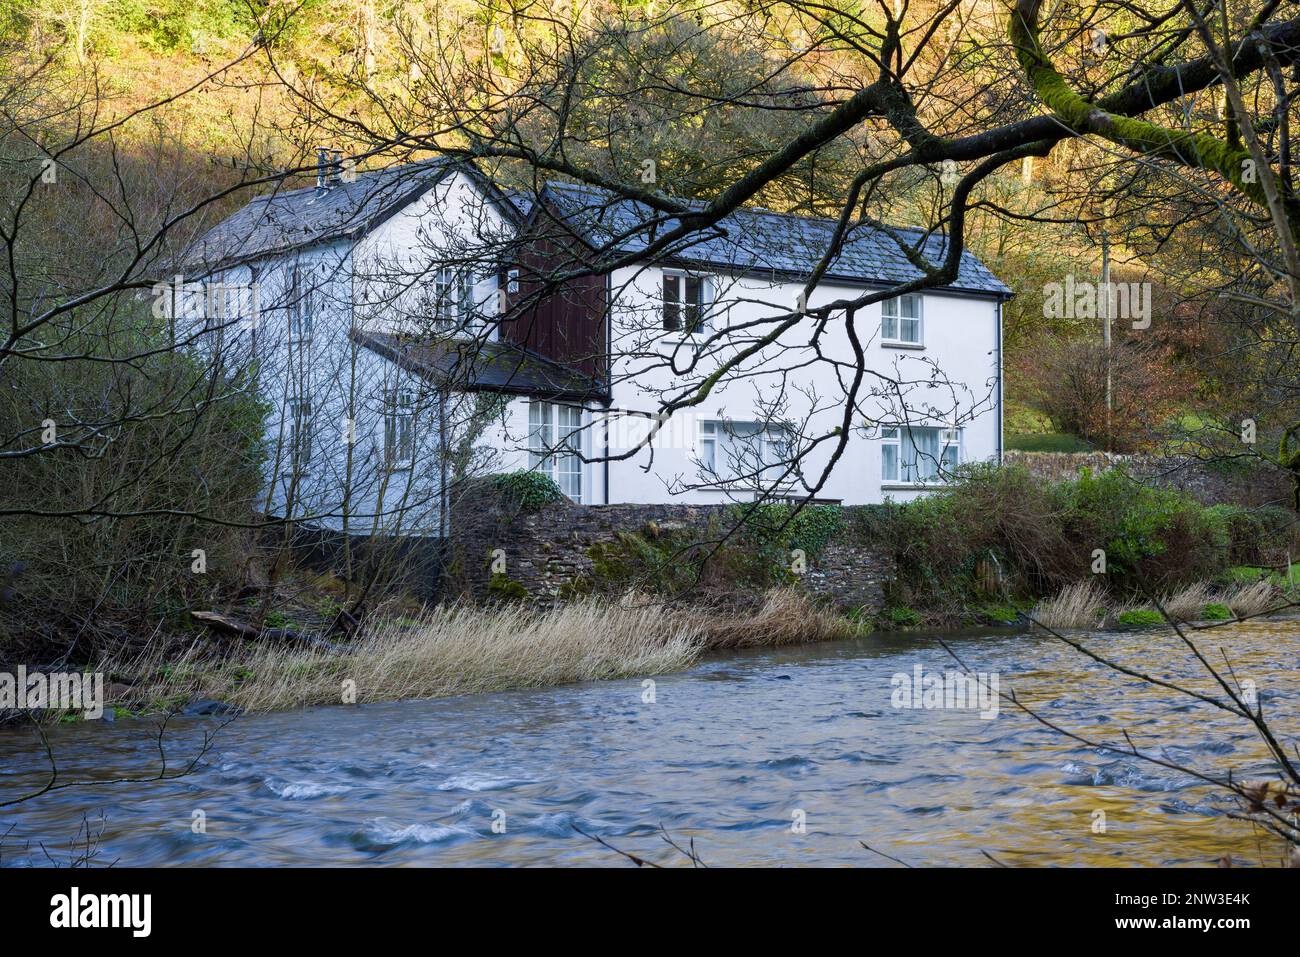 A cottage on the bank of the River Barle near Dulverton in the Exmoor National Park, Somerset, England. Stock Photo